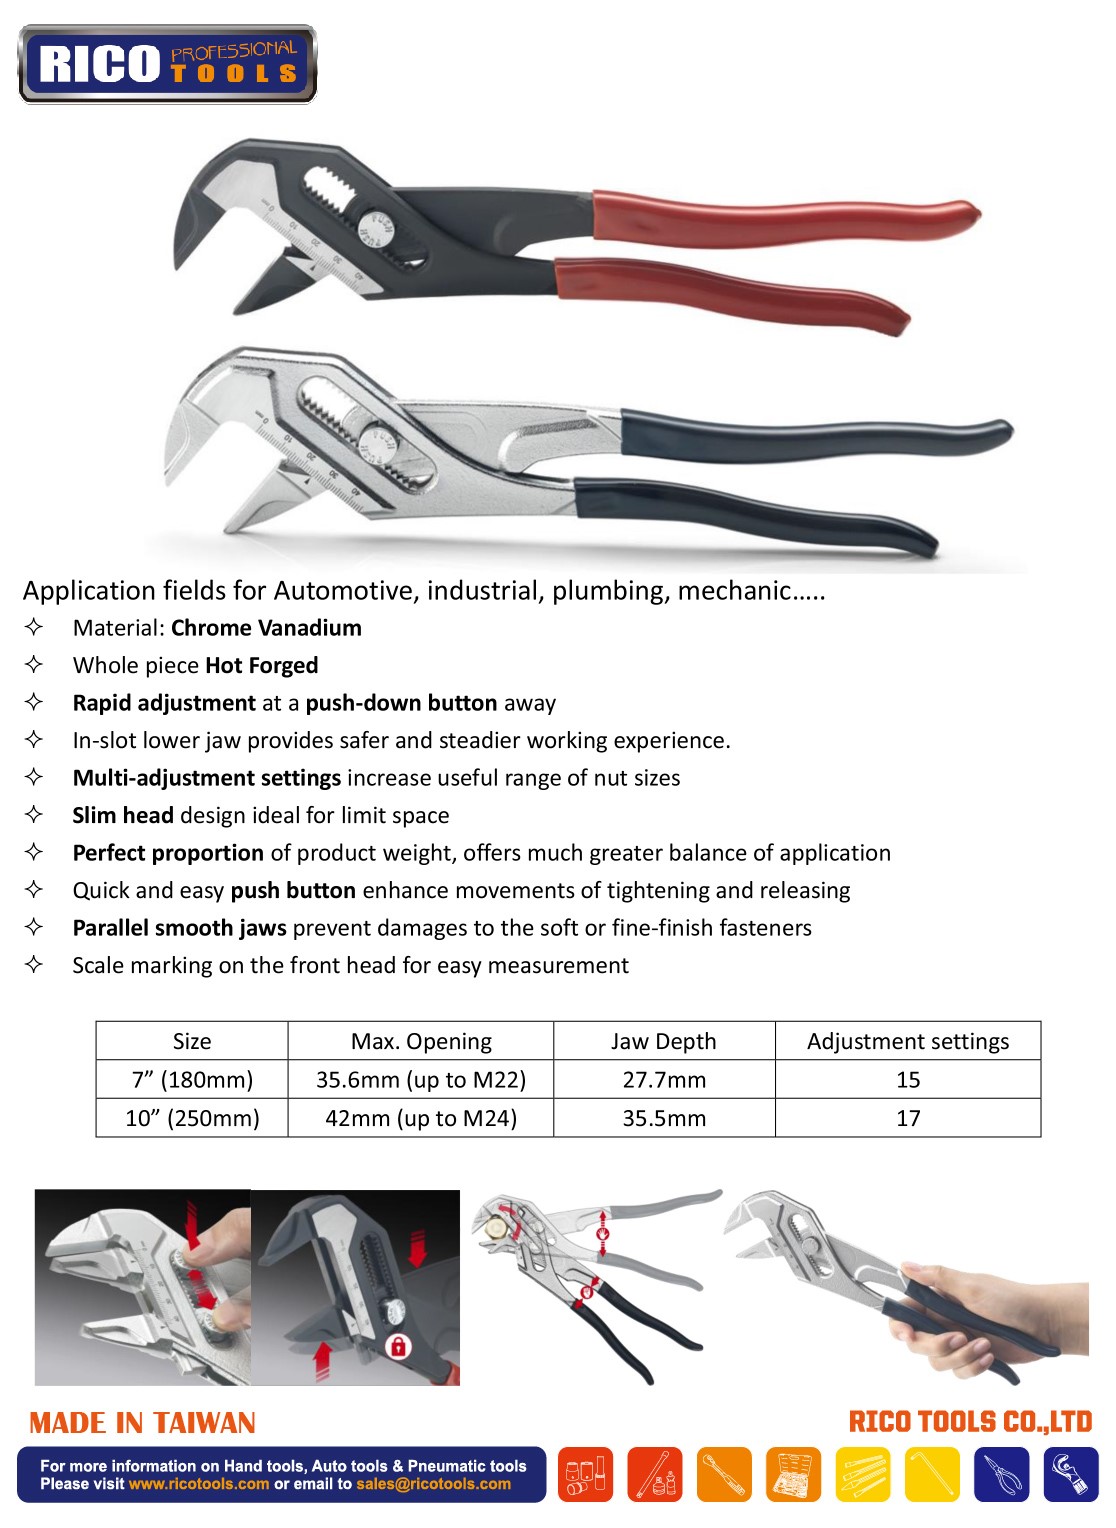 [RICO TOOLS] Pliers Wrench Series